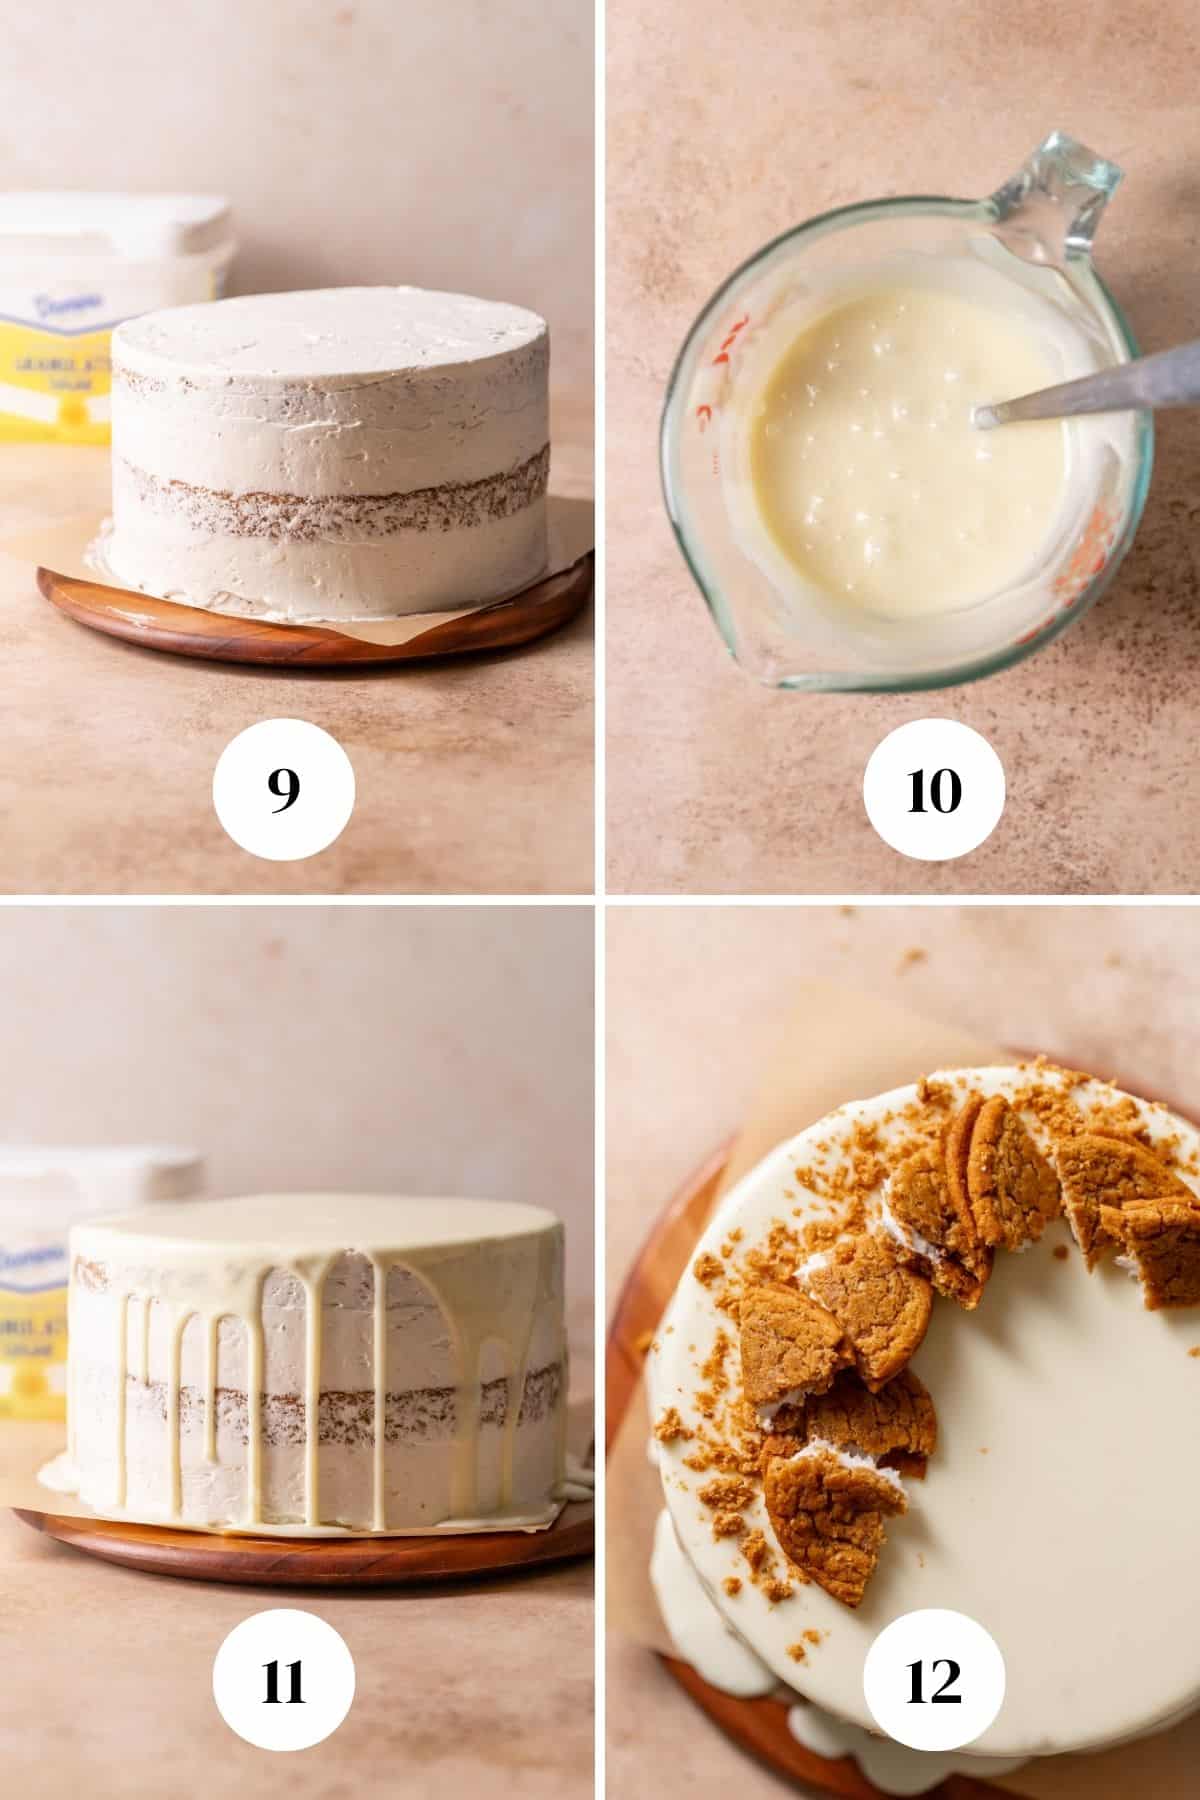 a process collage of the steps for frosting and decorating the oatmeal cake.